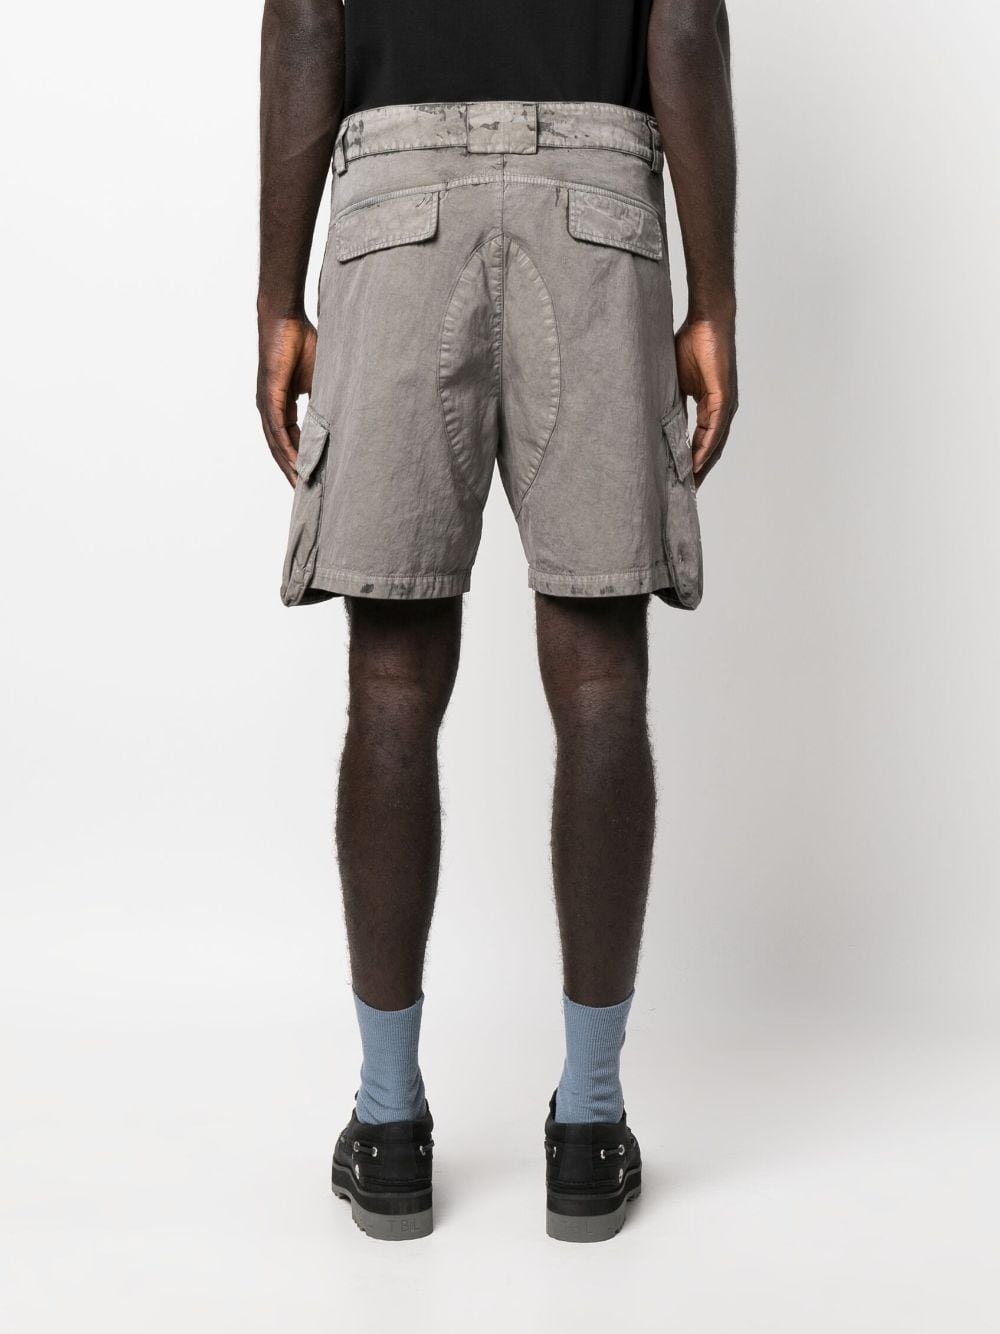 x Timberland mid-weight cargo shorts - 4